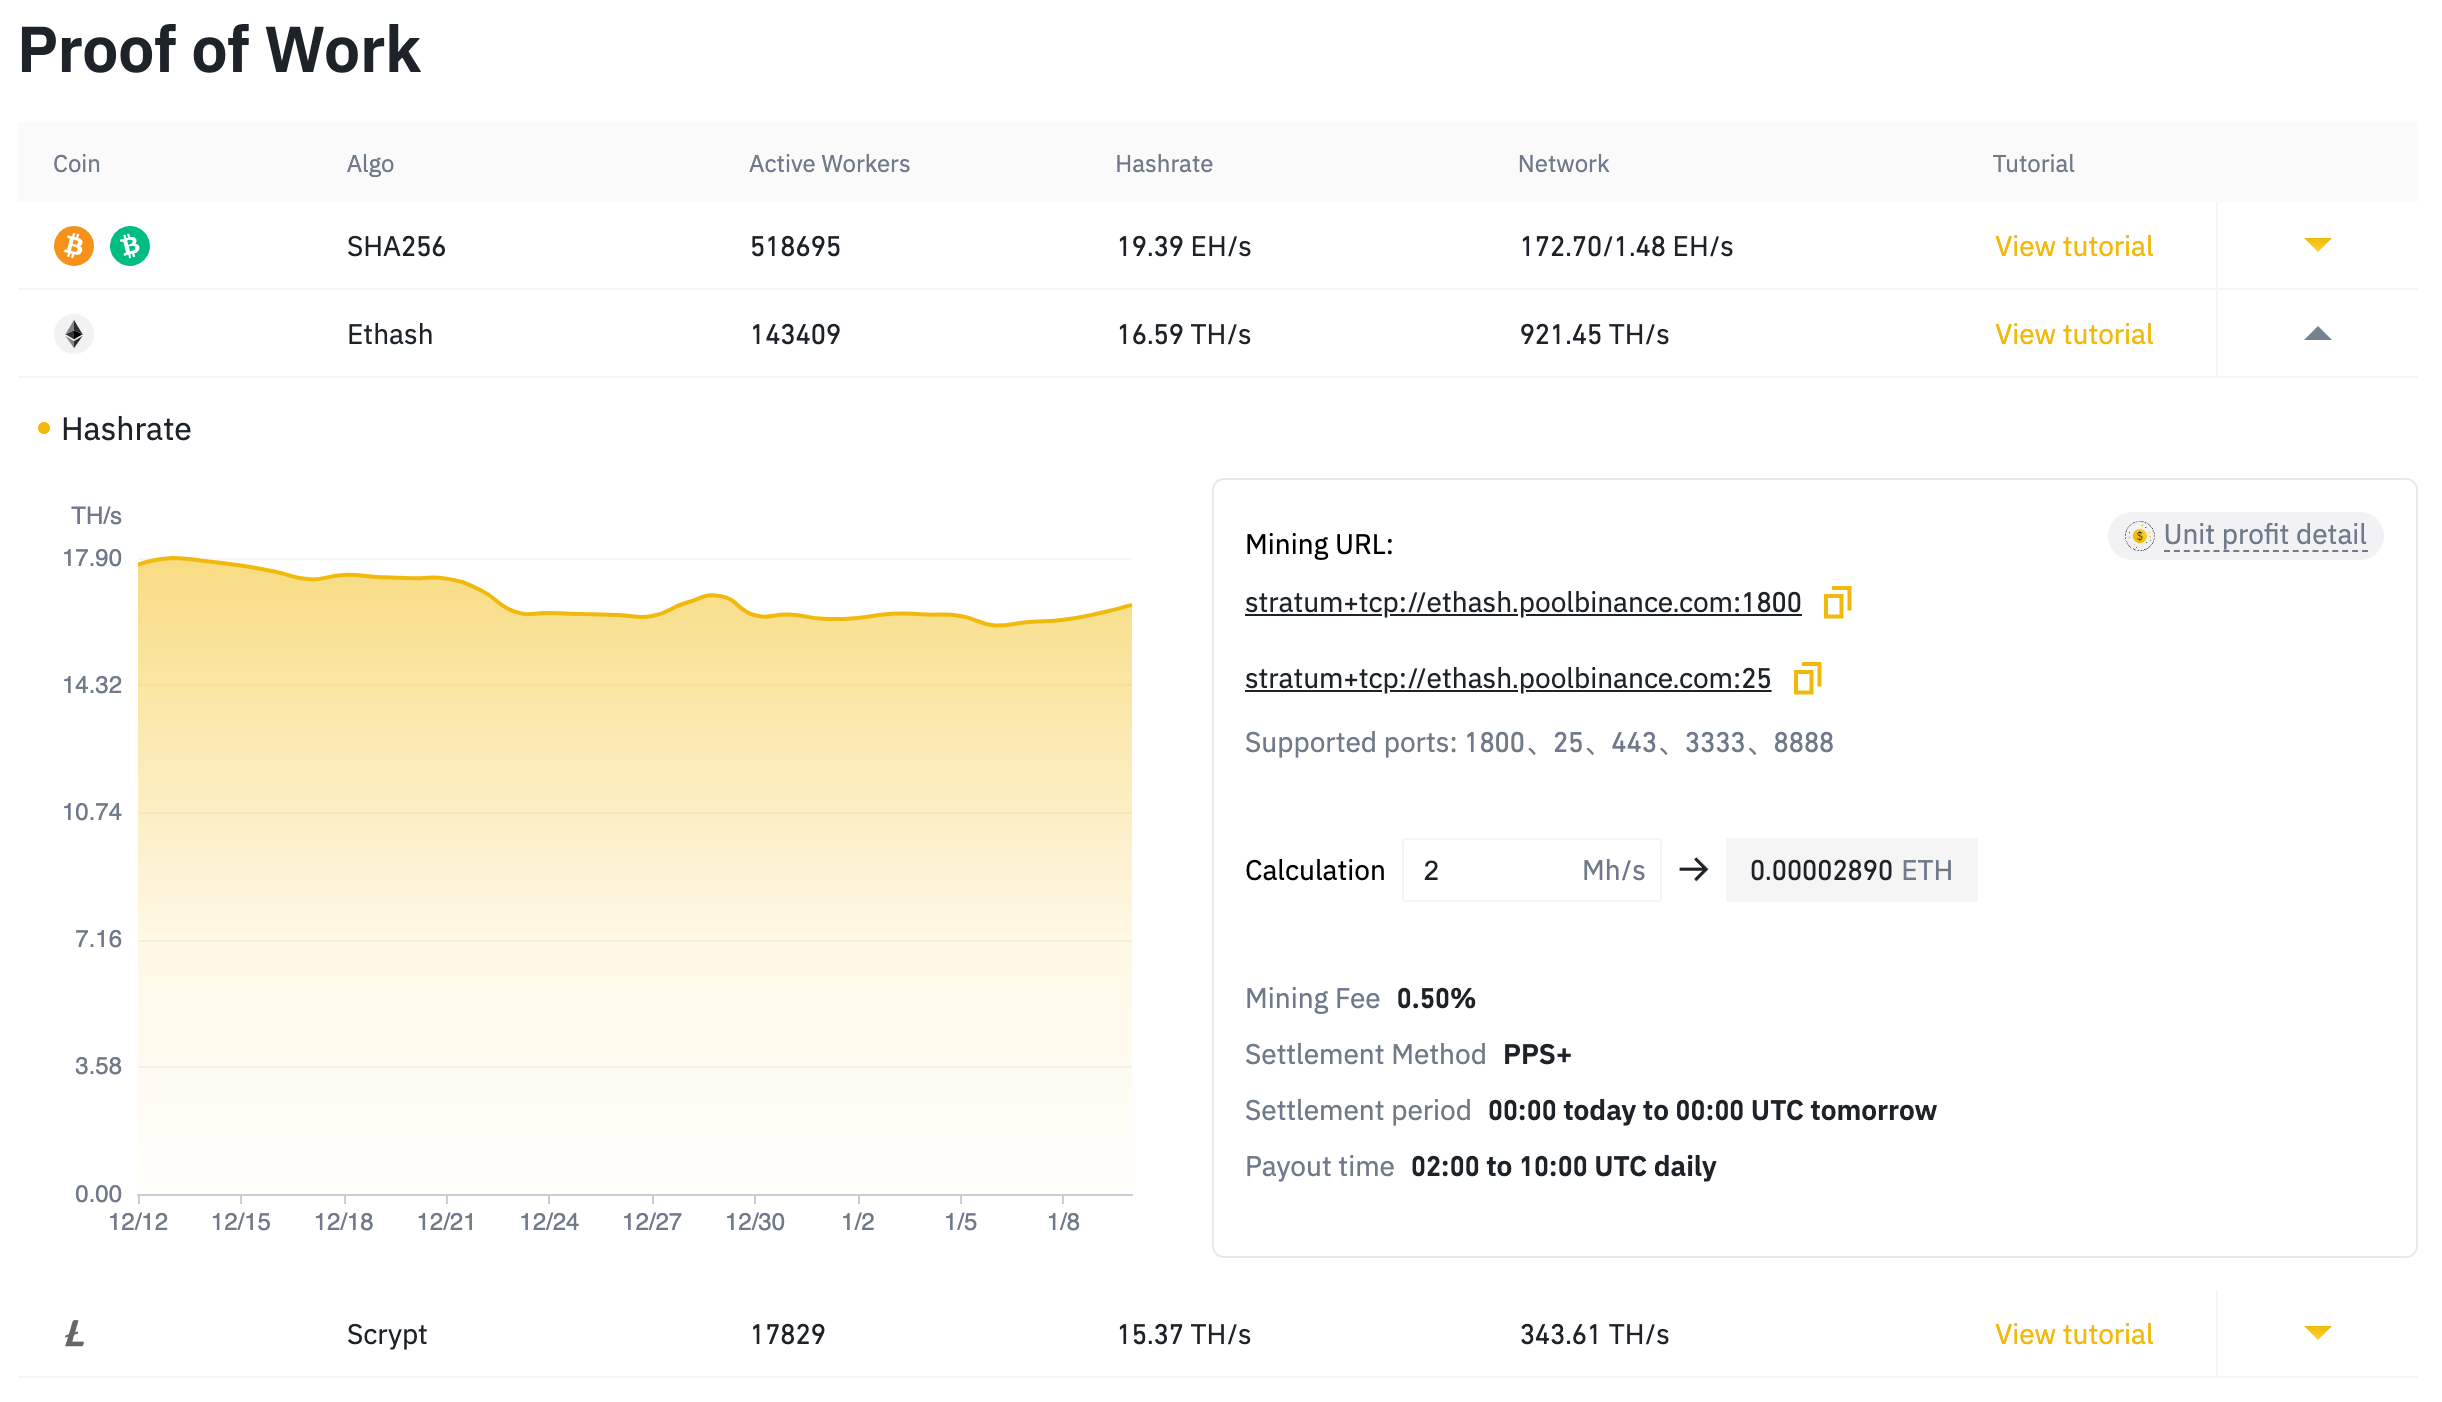 View of the Ethash mining pool. The mining URL and the current hashrate of 16.59 TH/s are shown. By means of a profit calculator, prospectors can calculate their possible returns. A mining fee of 0.5% is charged for Ethash.